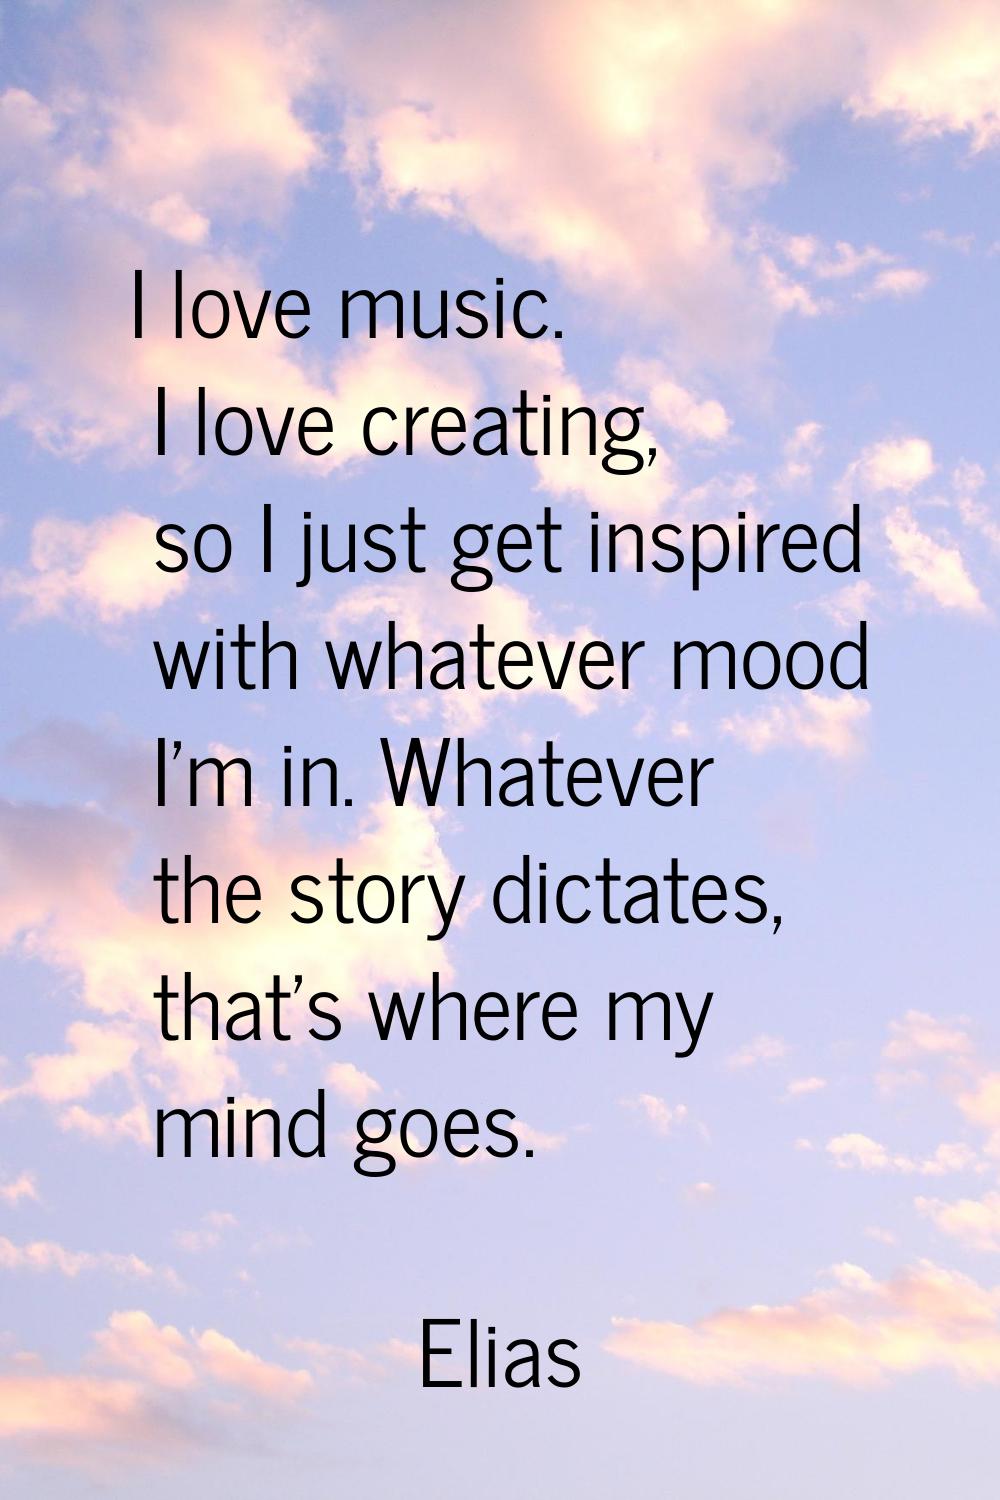 I love music. I love creating, so I just get inspired with whatever mood I'm in. Whatever the story